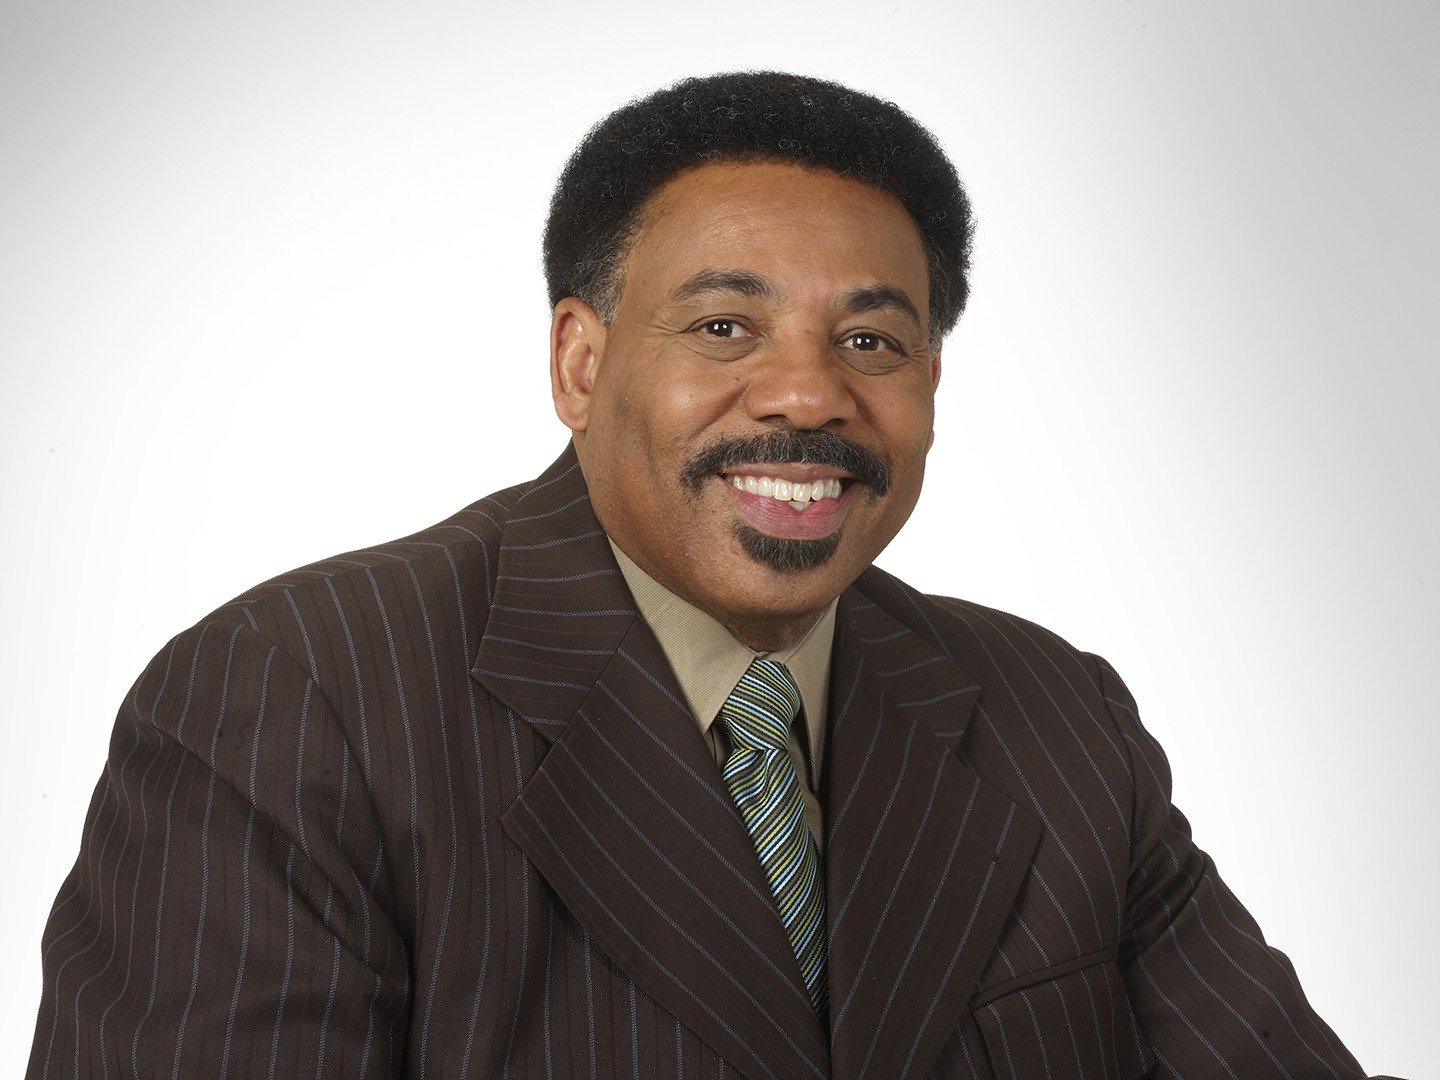 Dr. Tony Evans on TV Episode 13 Channels and schedules